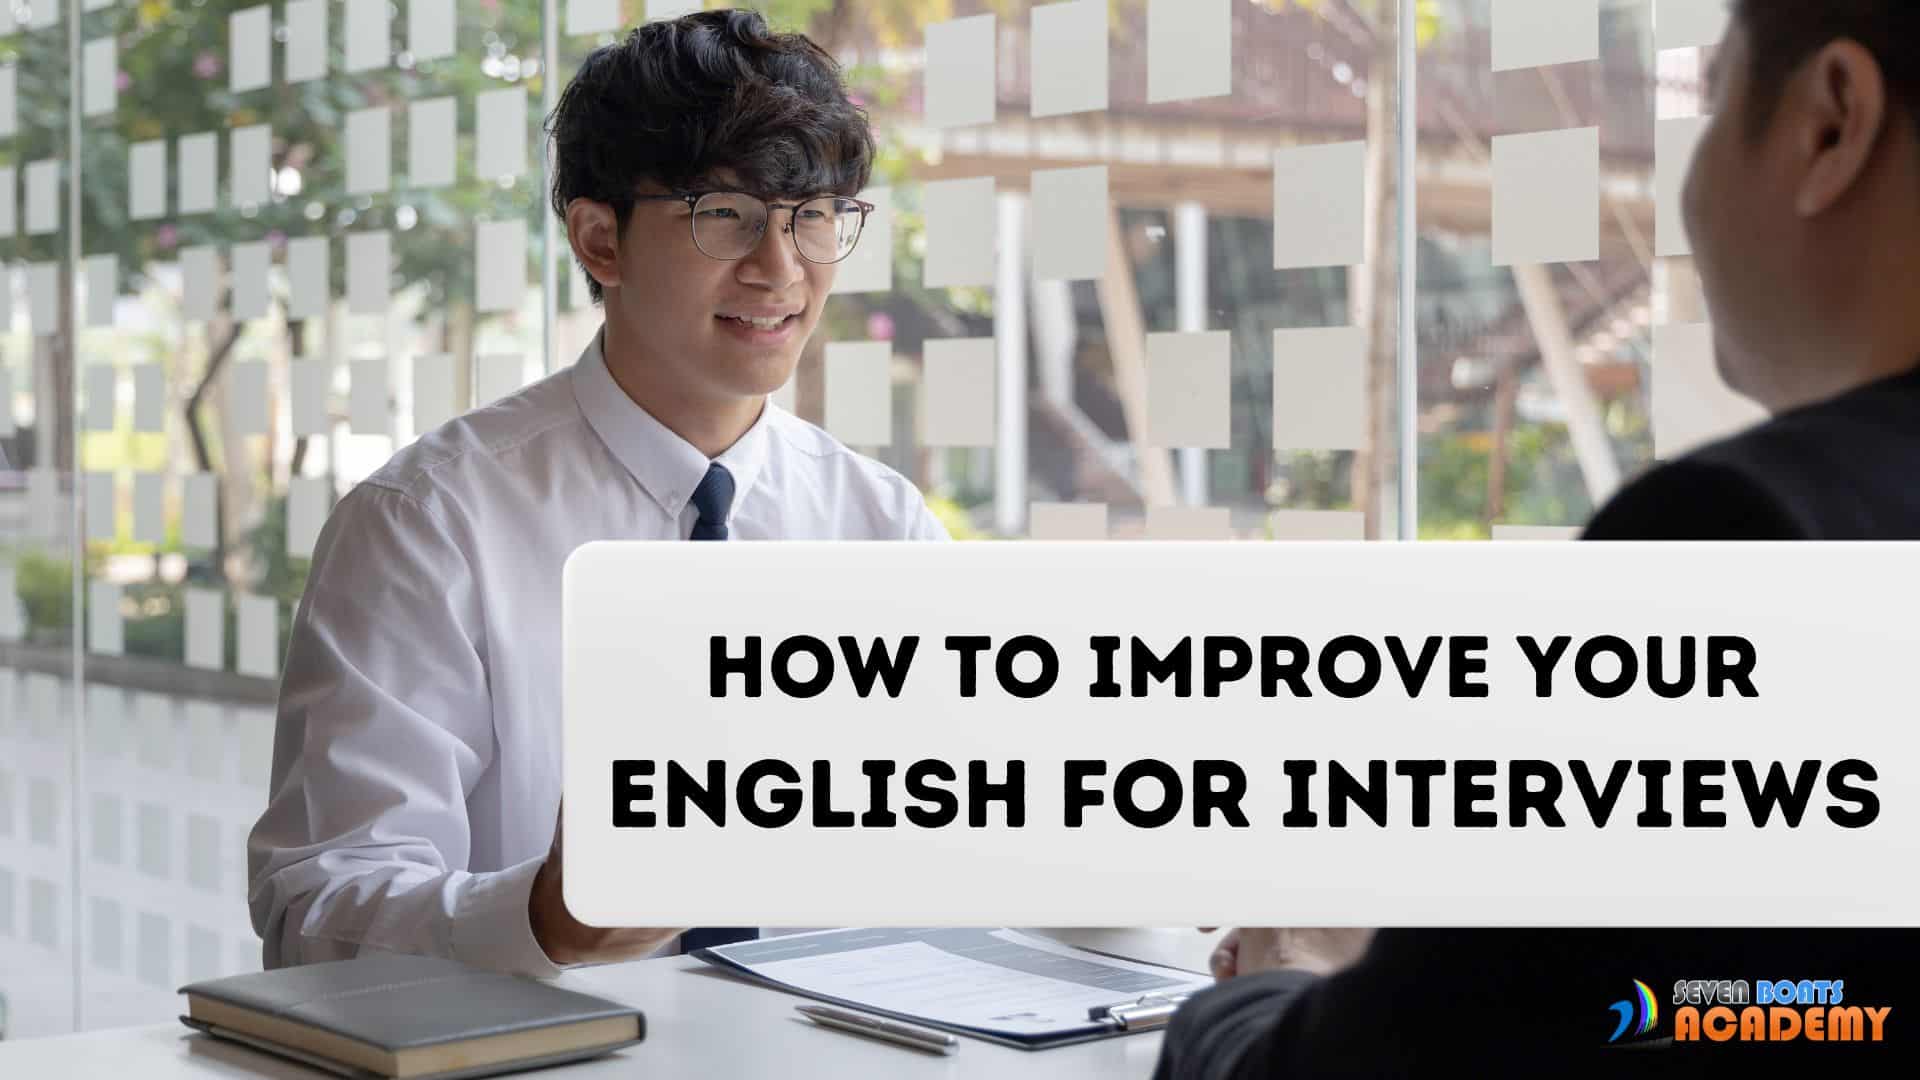 How to Improve Your English for Interviews